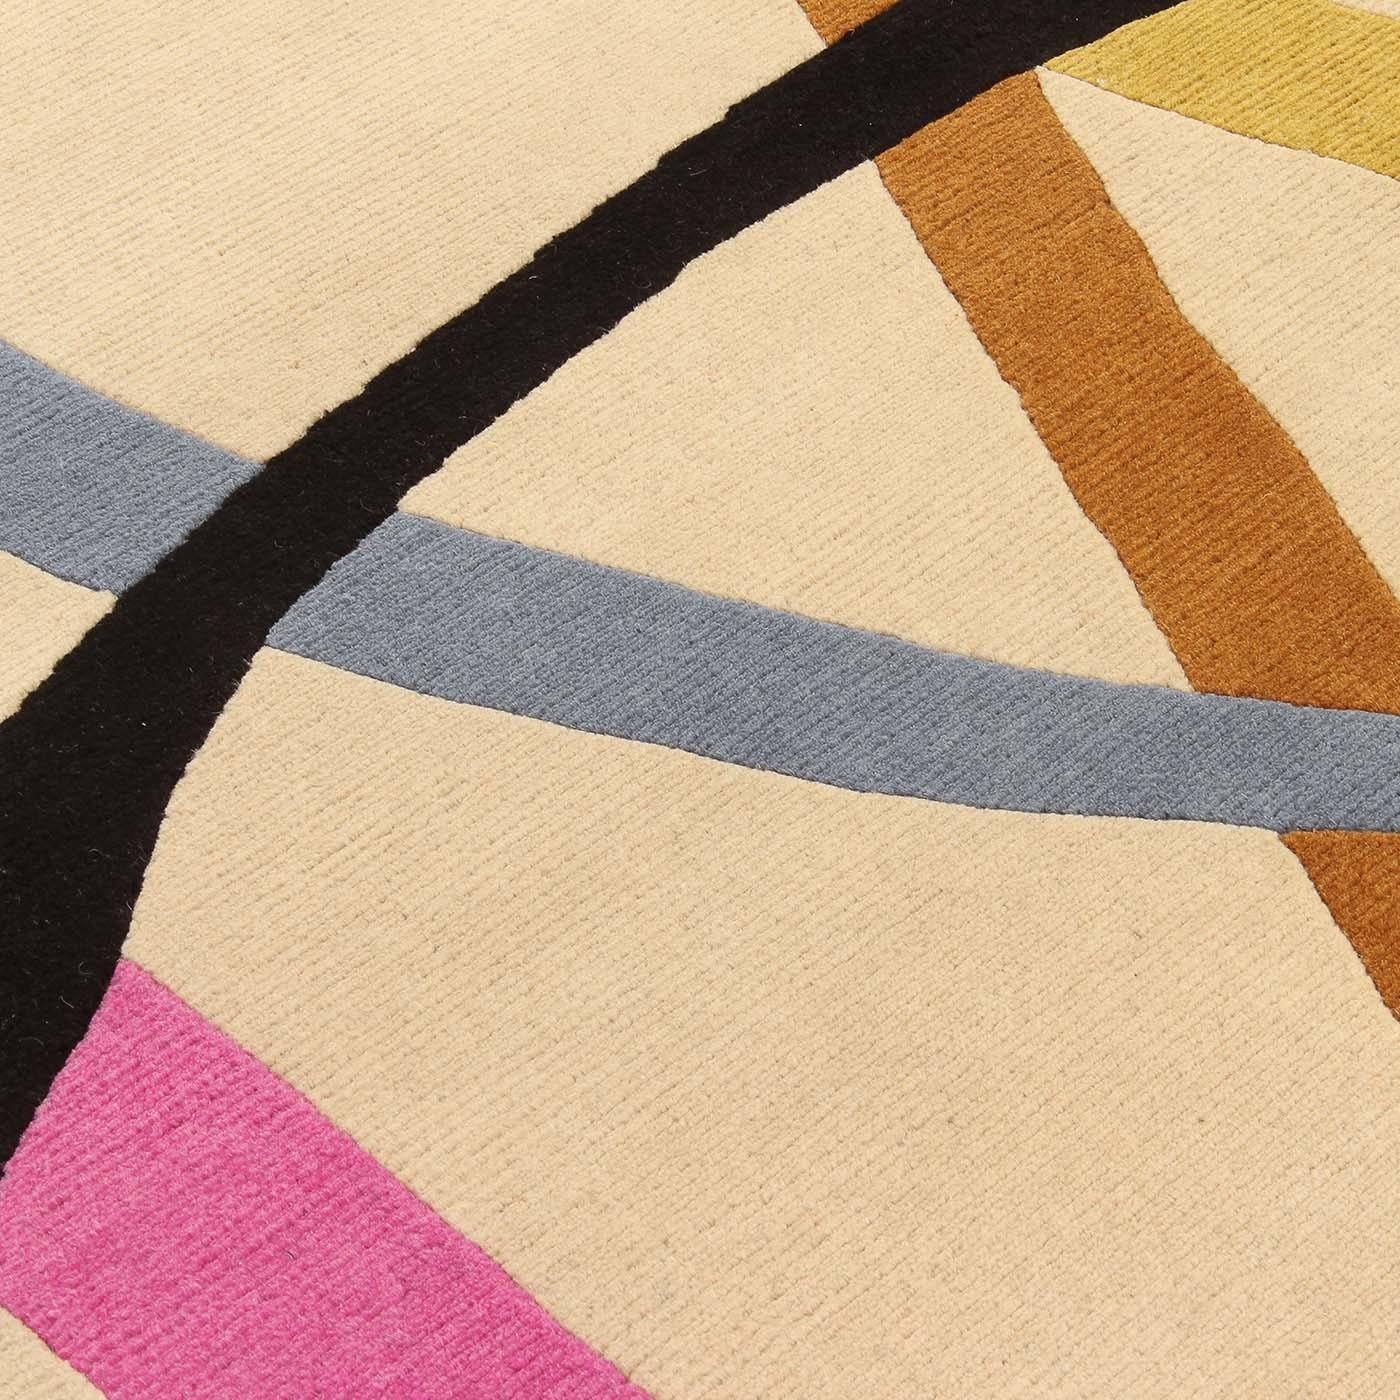 Elegant and playful, the hand drawn lines in this composition create a unique and elegant carpet. An intriguing three-dimensional pattern originally designed by Gio Ponti to recreate a contemporary, yet classical, diamond texture. All Gio Ponti